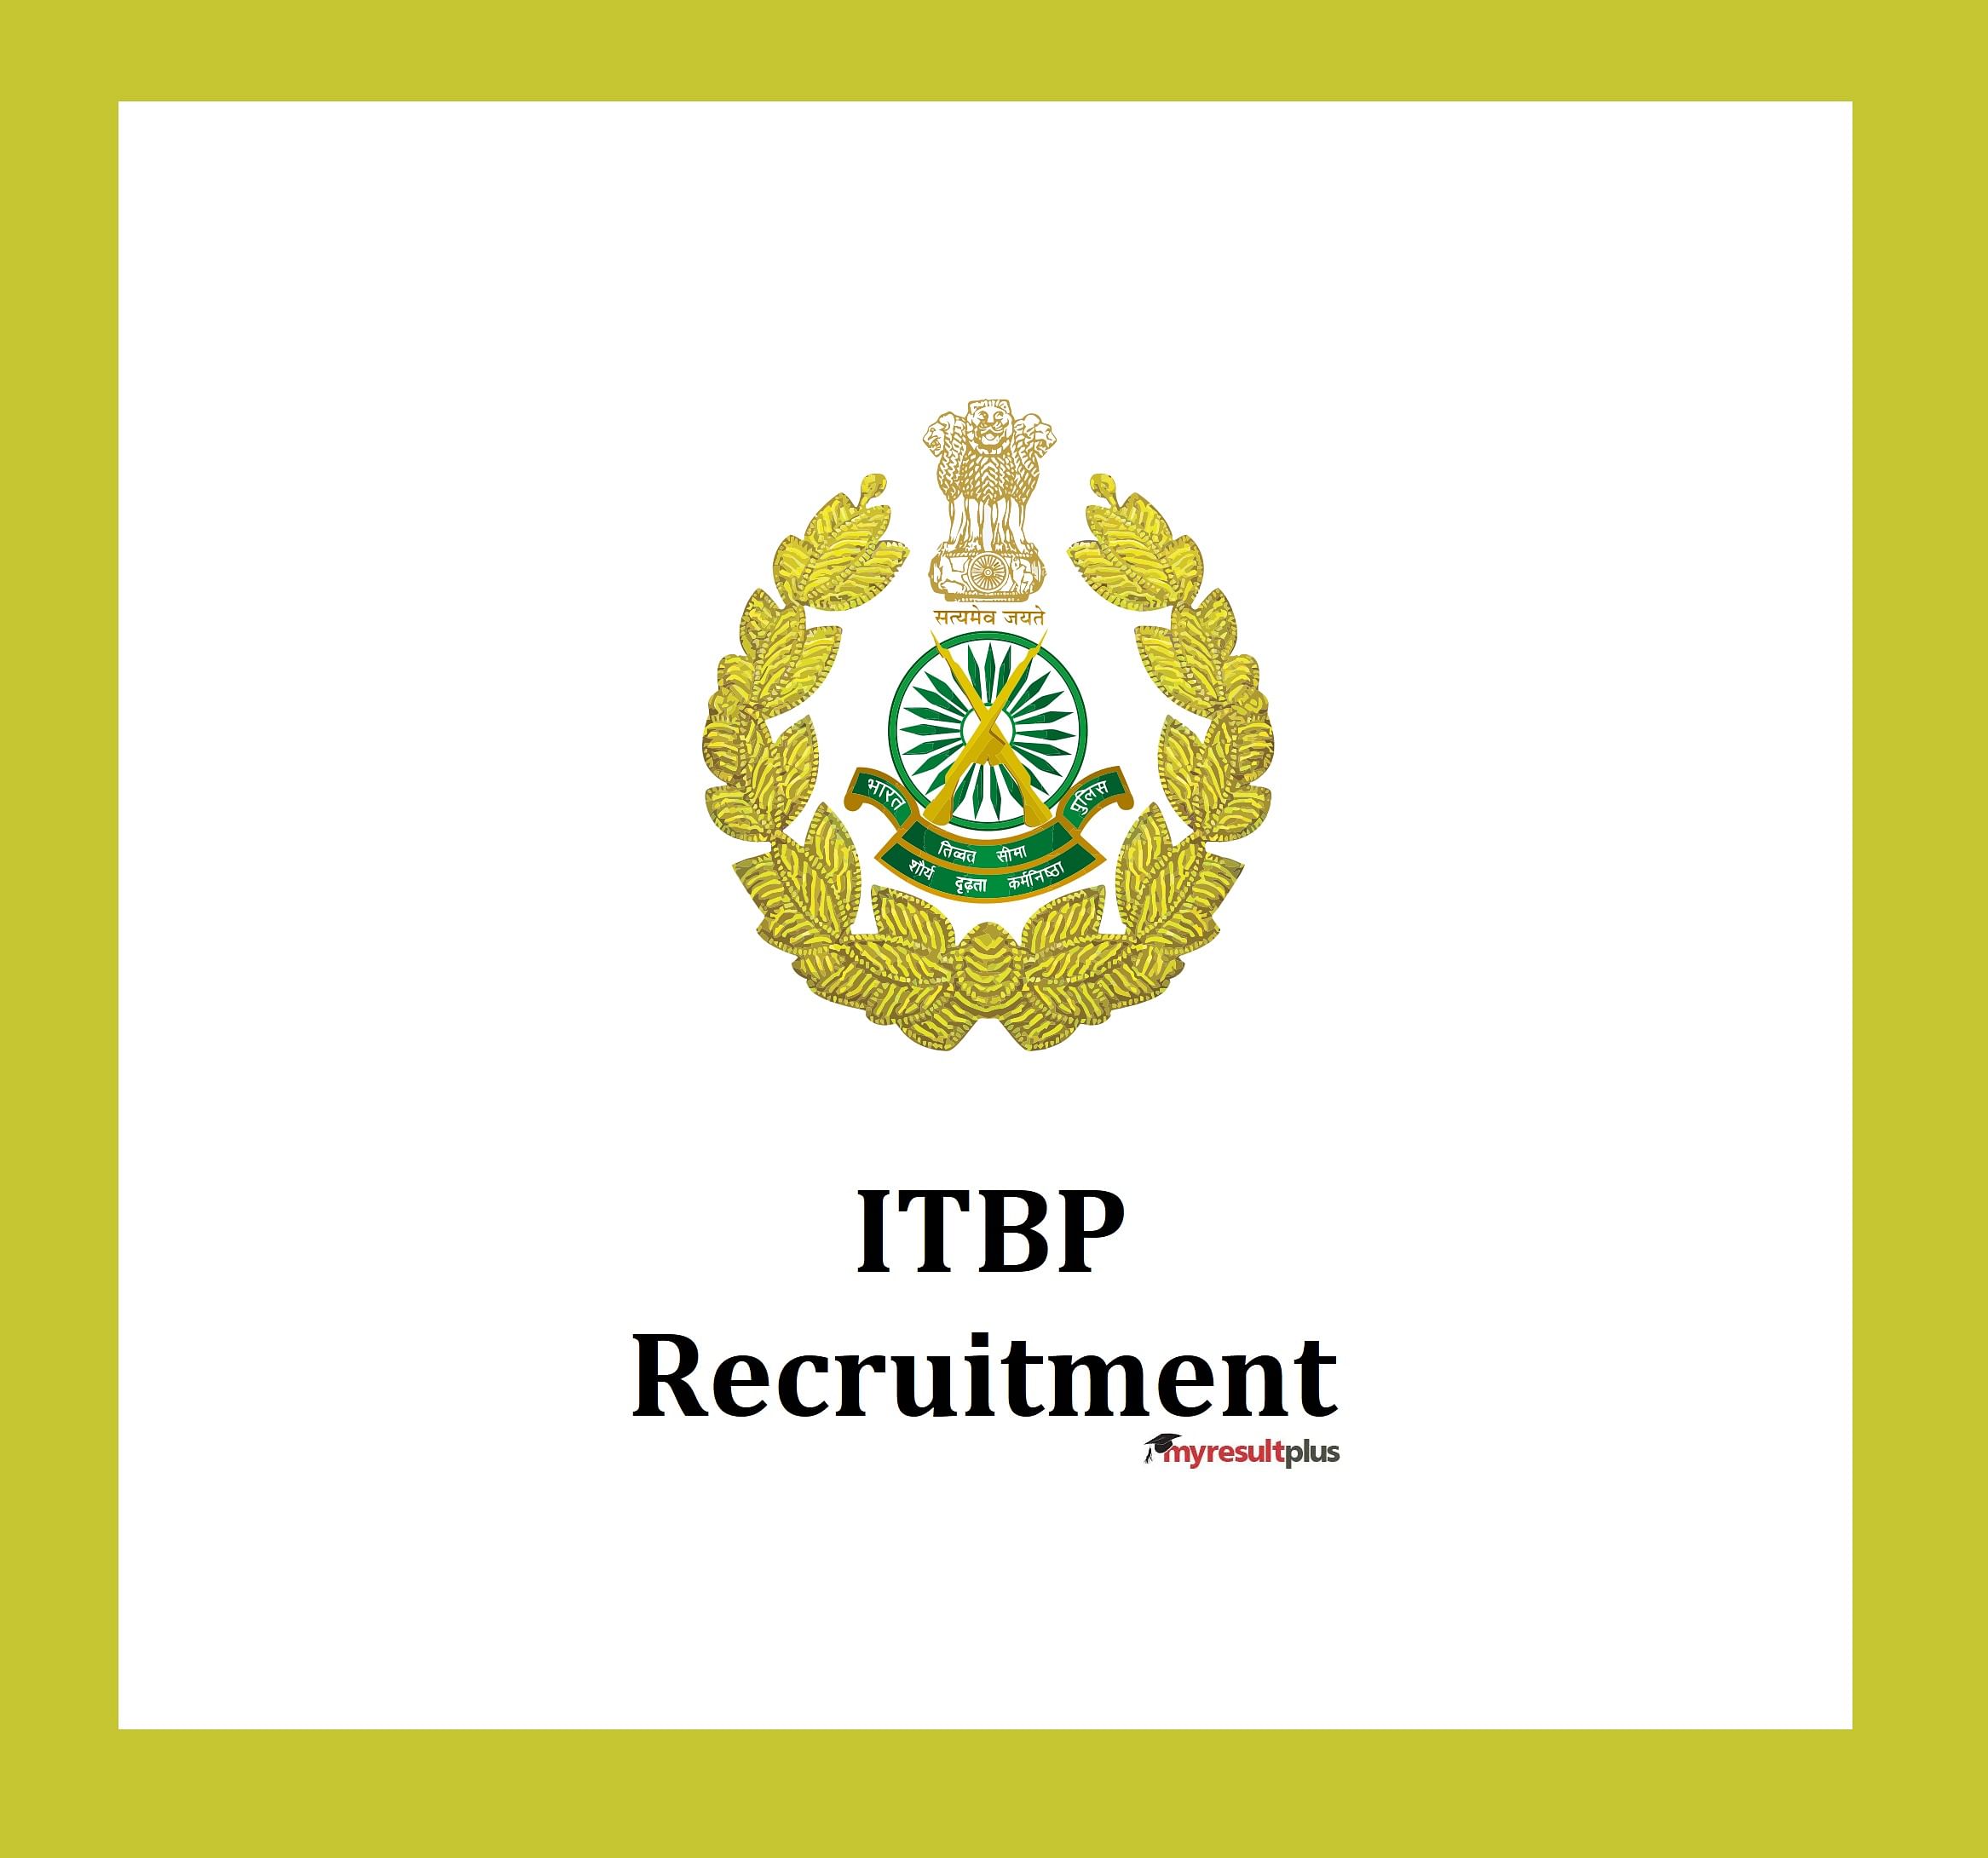 ITBP Recruitment 2022: Few Hours Left to Register for ASI Stenographer Posts, Apply Here